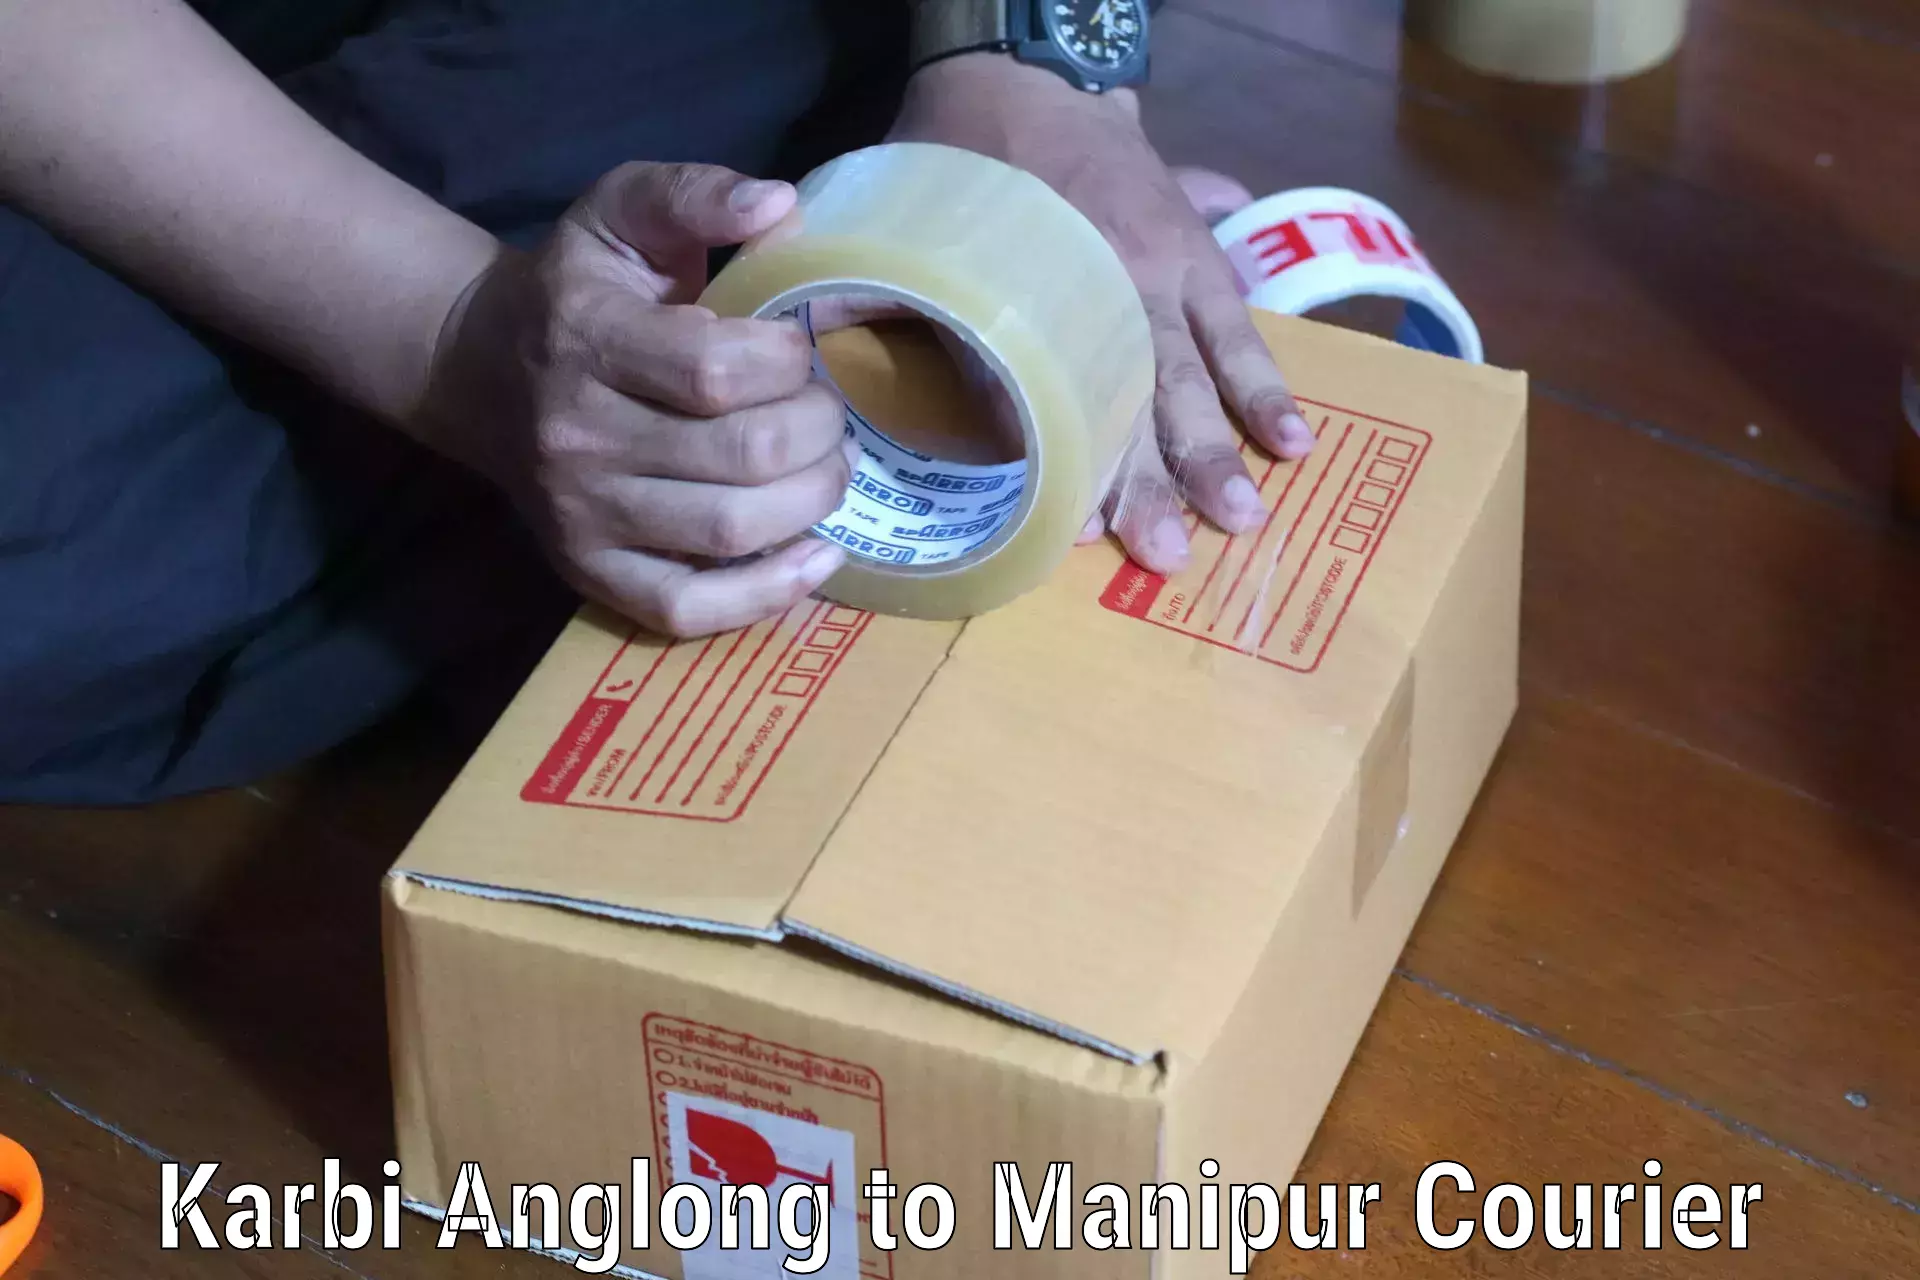 Professional courier services in Karbi Anglong to Imphal